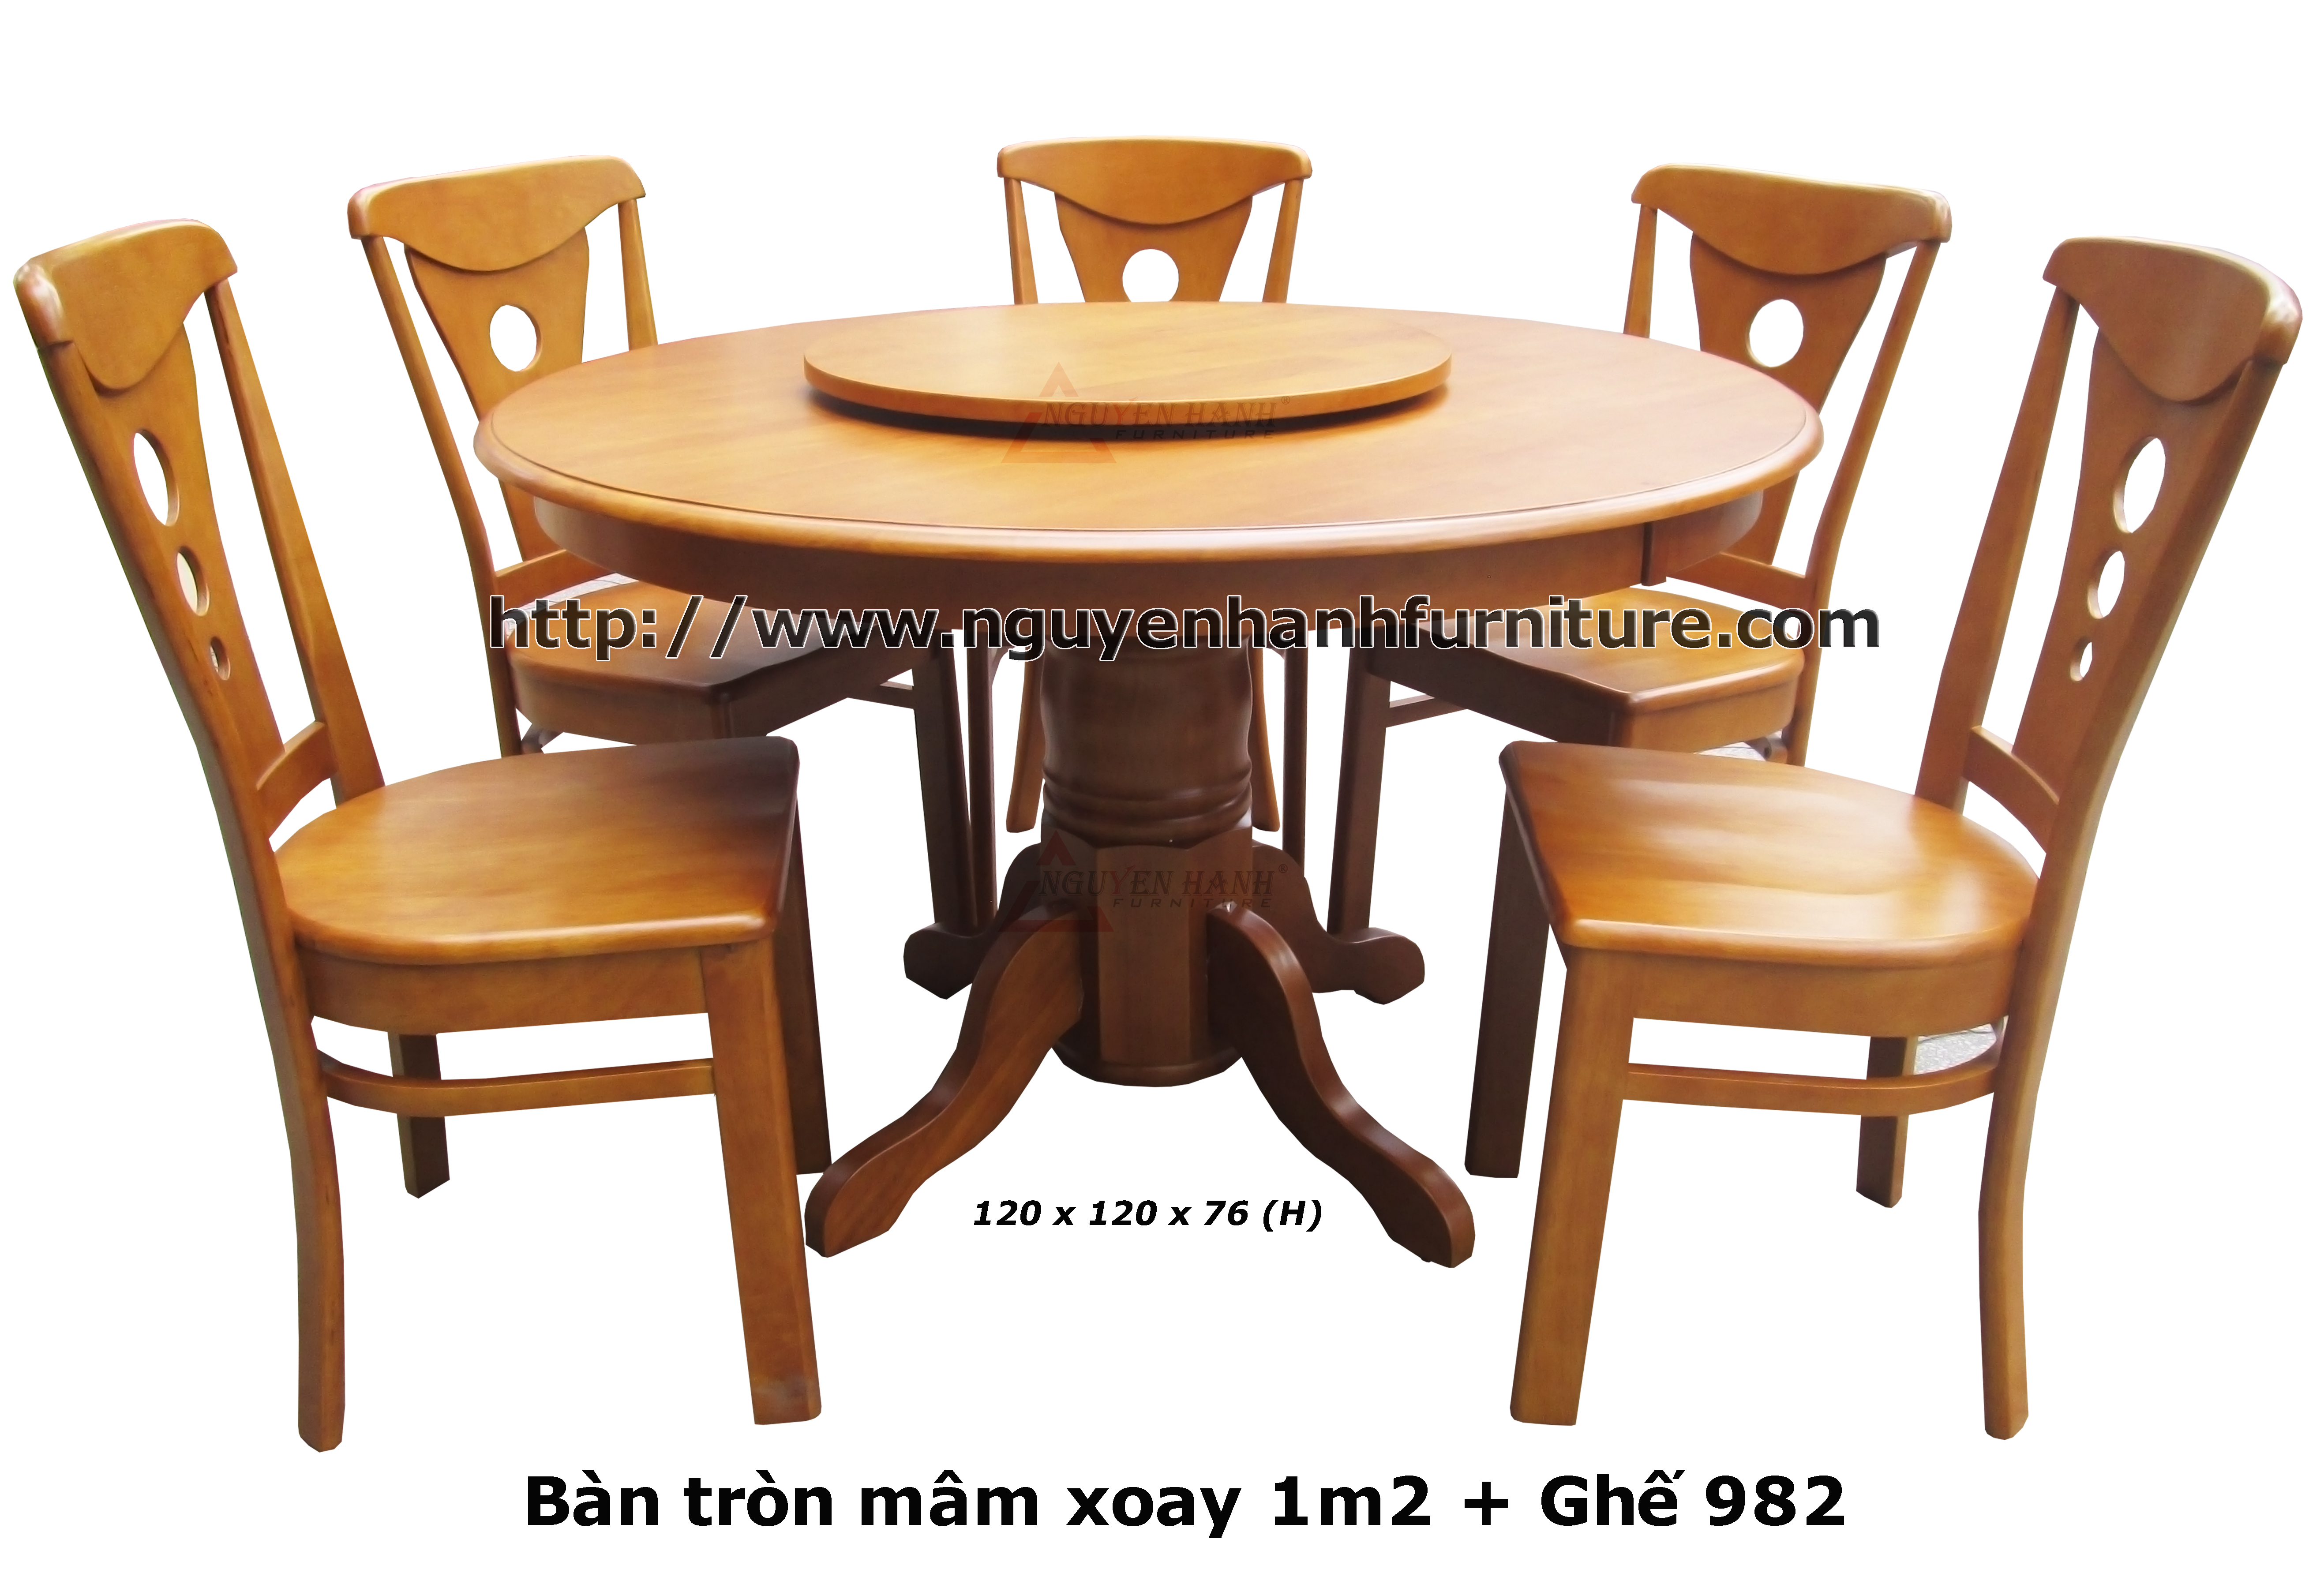 Name product: 120 Round table with chair 982 - Dimensions: 120 x 120 x 76 (H) - Description: Wood natural rubber